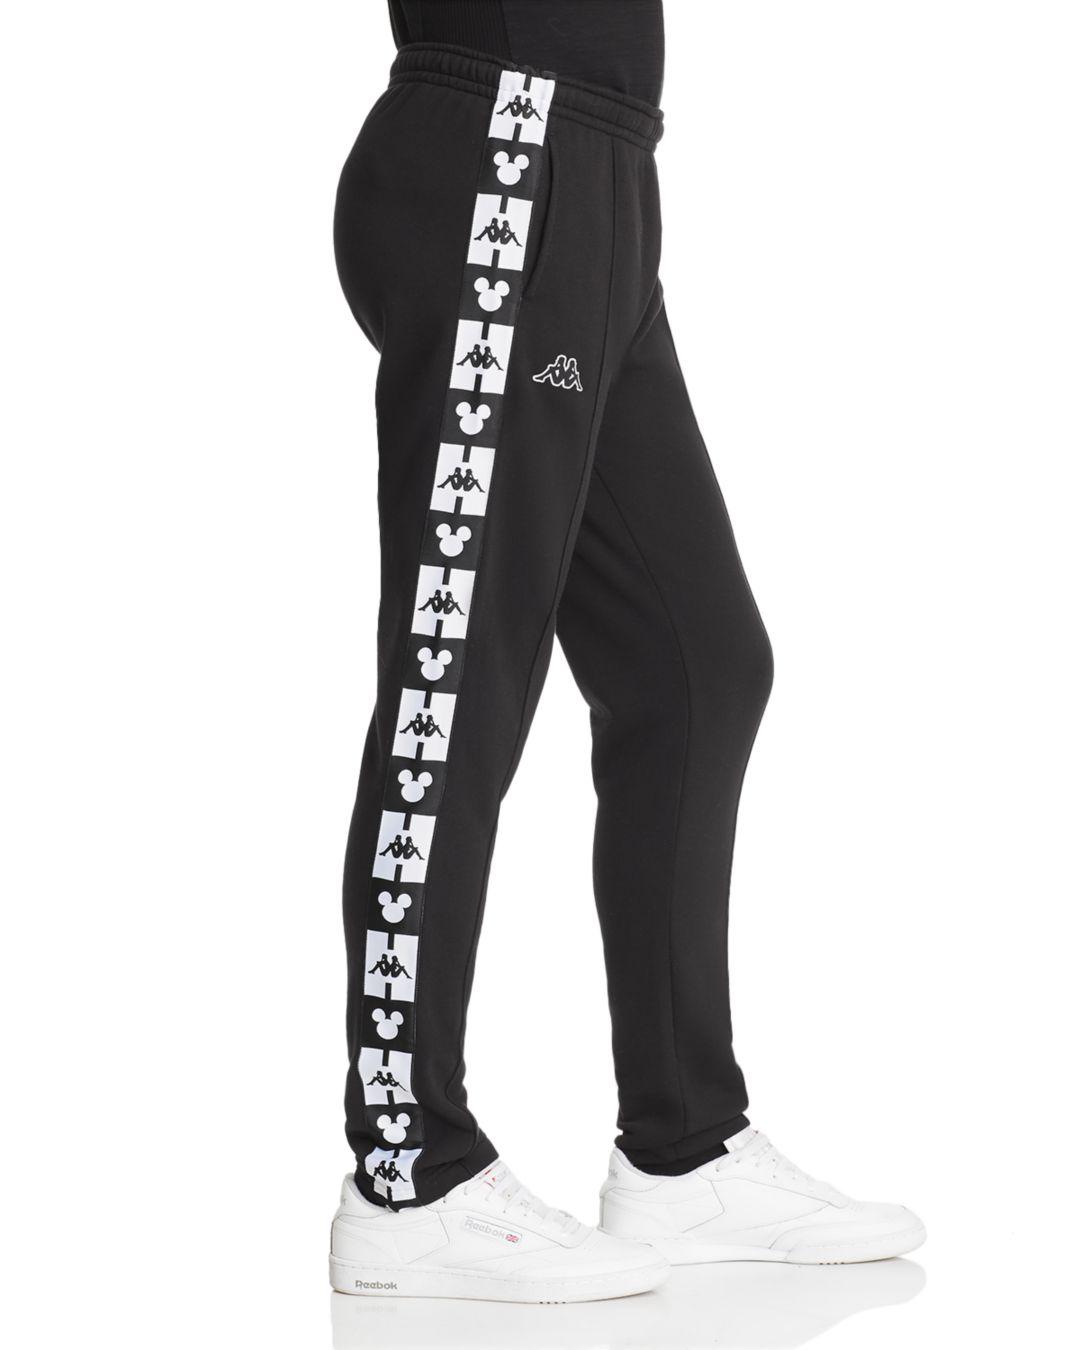 Kappa X Disney Authentic Alphonso Track Pants in Black for Men - Lyst